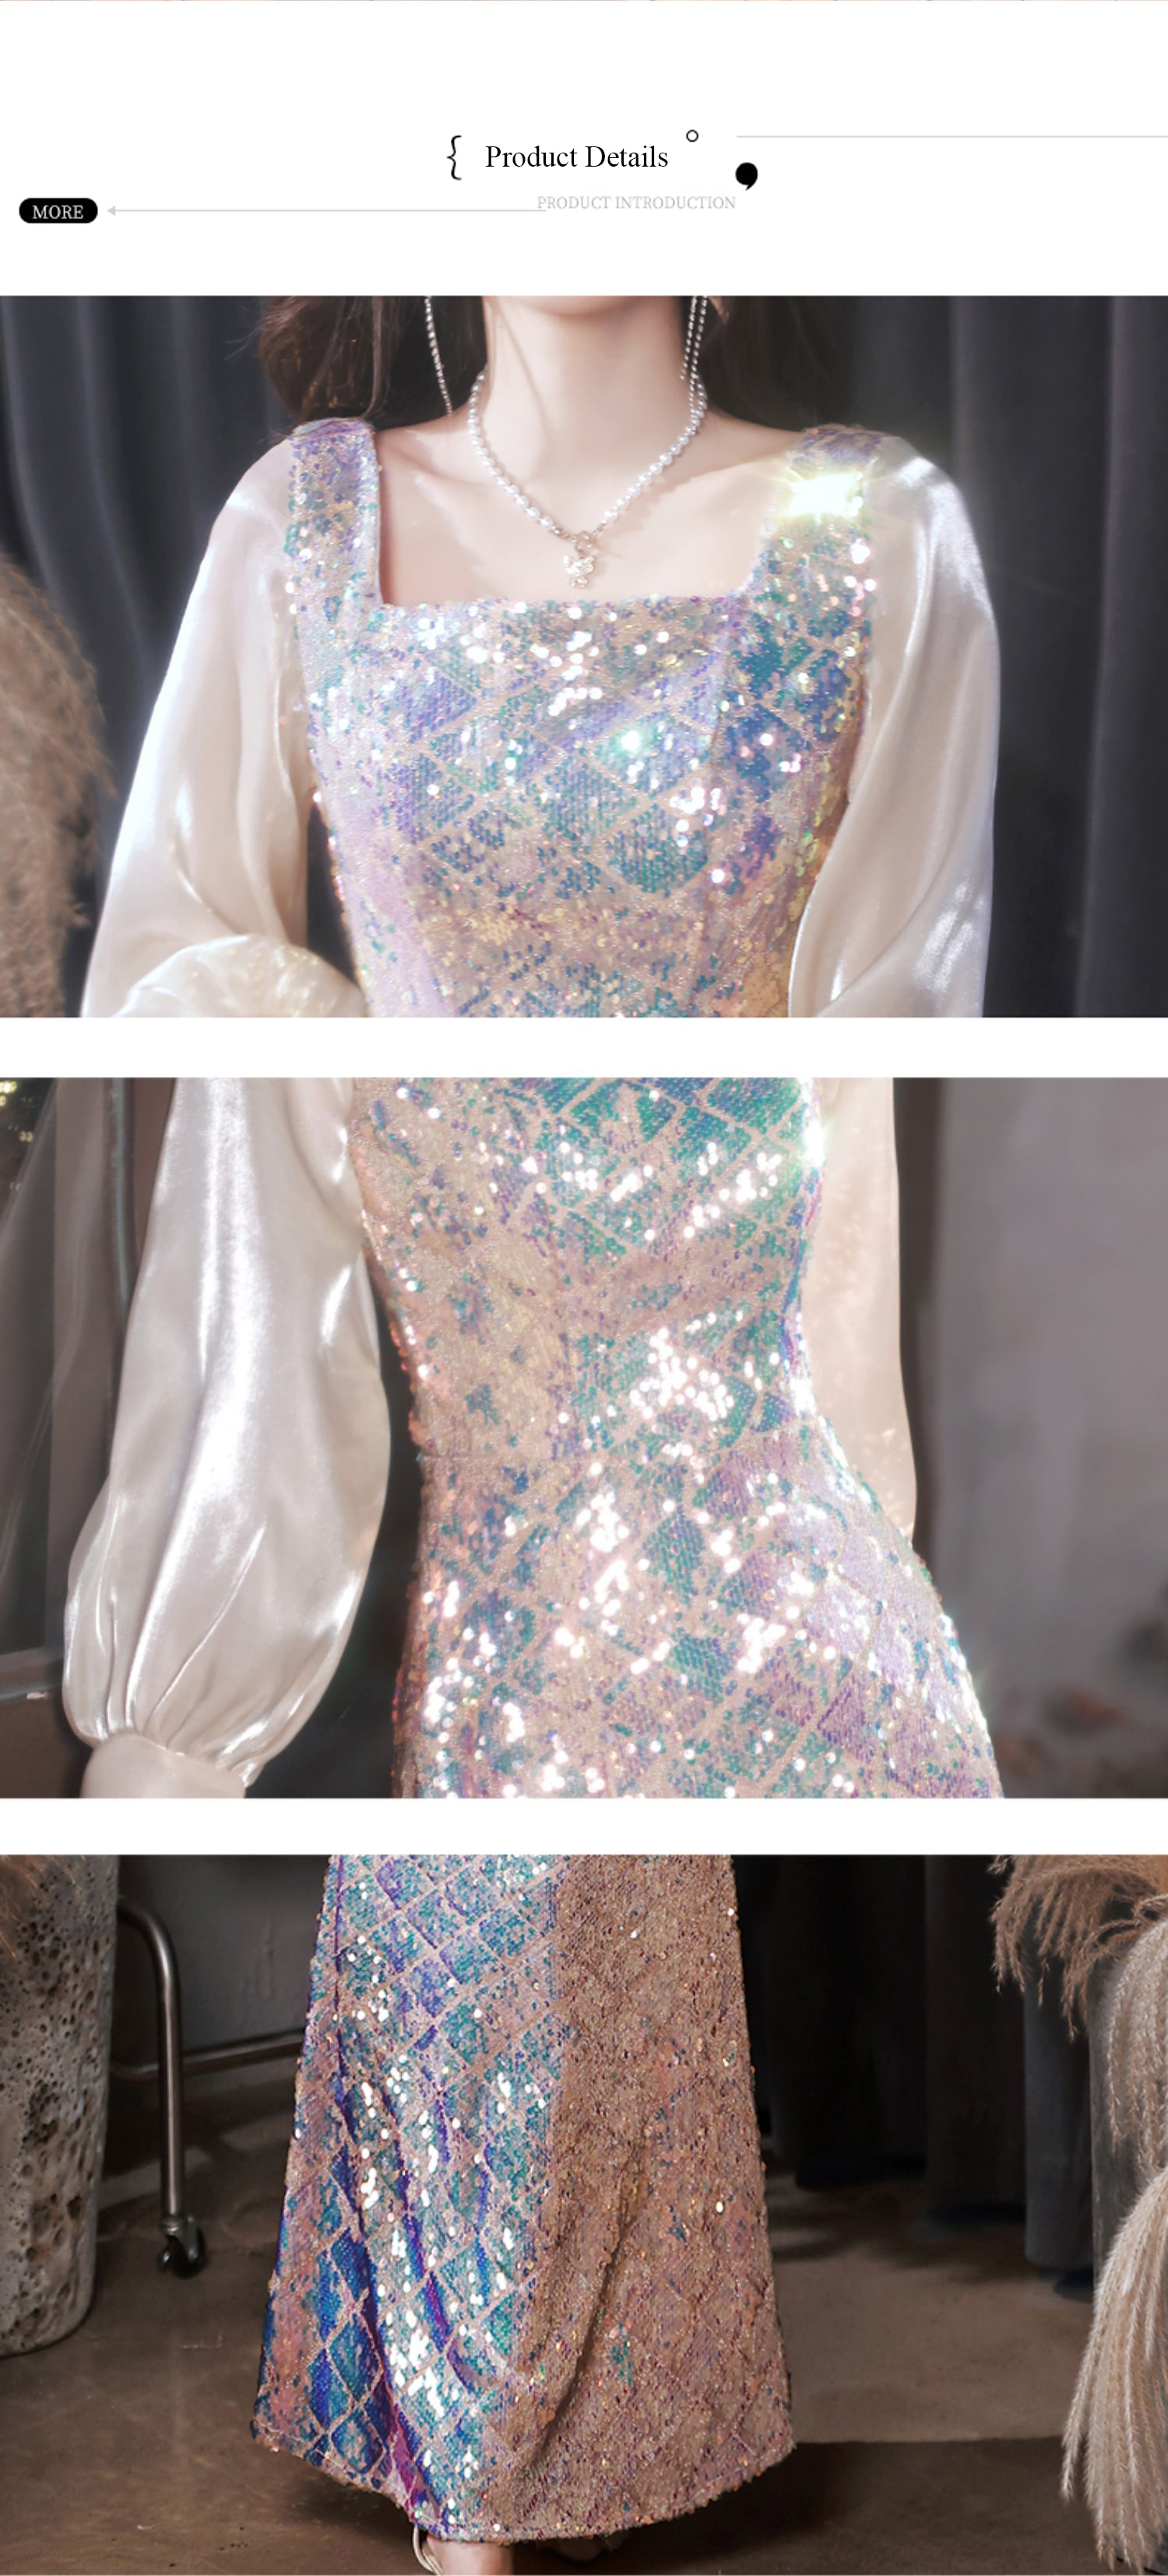 Luxury-Sparkly-Square-Neck-Long-Sleeve-Banquet-Party-Fishtail-Dress20